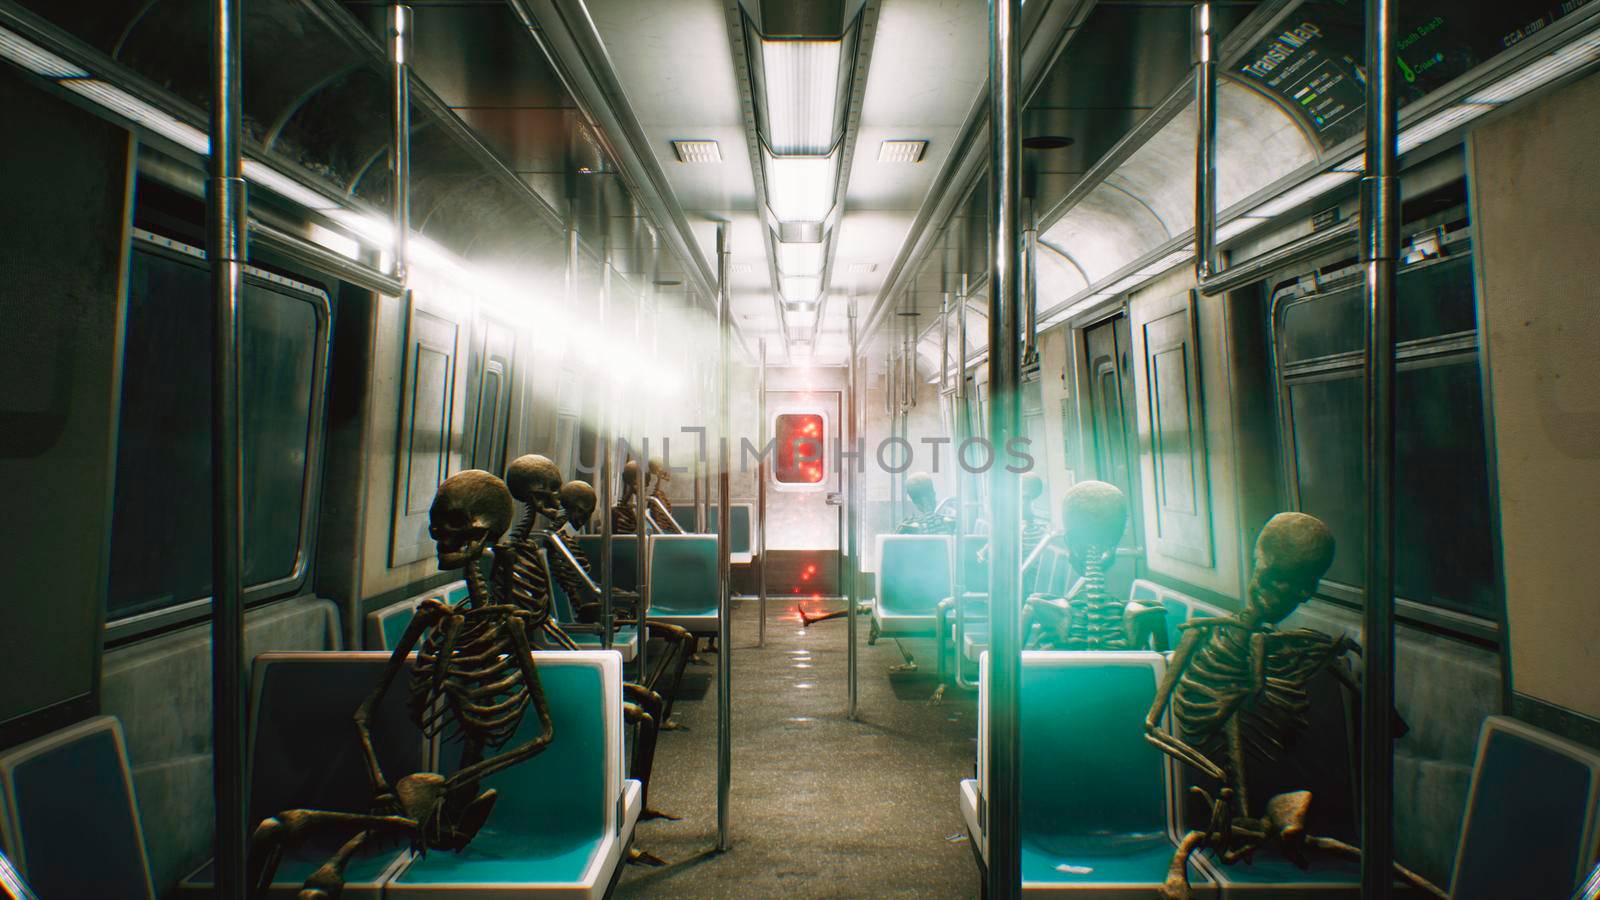 Abandoned railway horror train with skeletons. Horror and post apocalyptic scene.